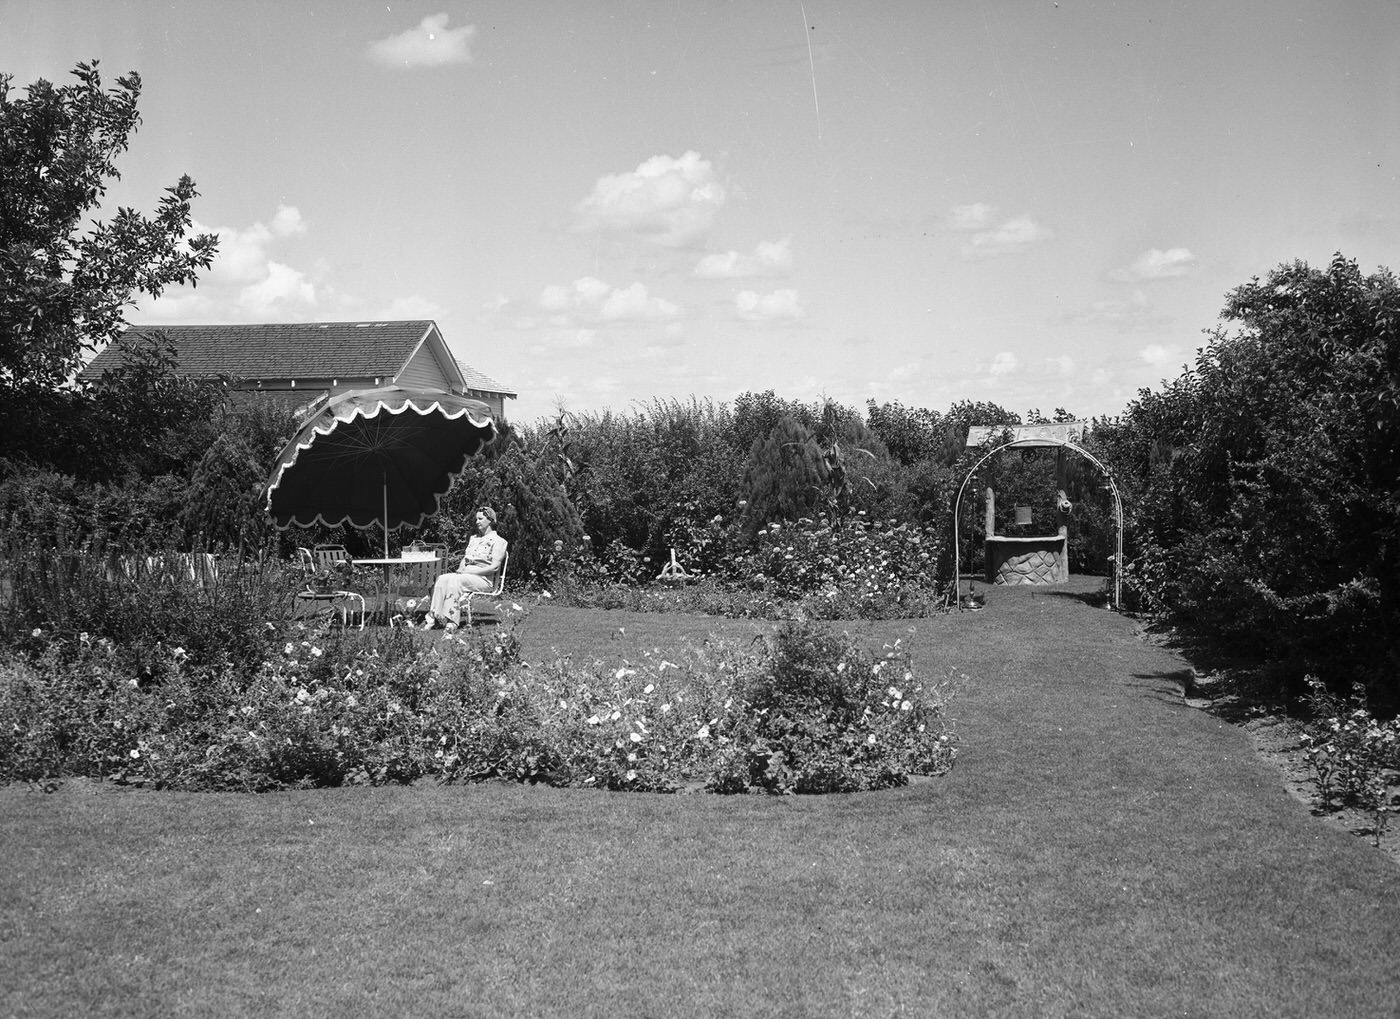 Mrs. C. H. Bertram, shown sitting at an umbrella-protected table in her "outdoor living room," which is surrounded with flowerbeds and hedges, 1940